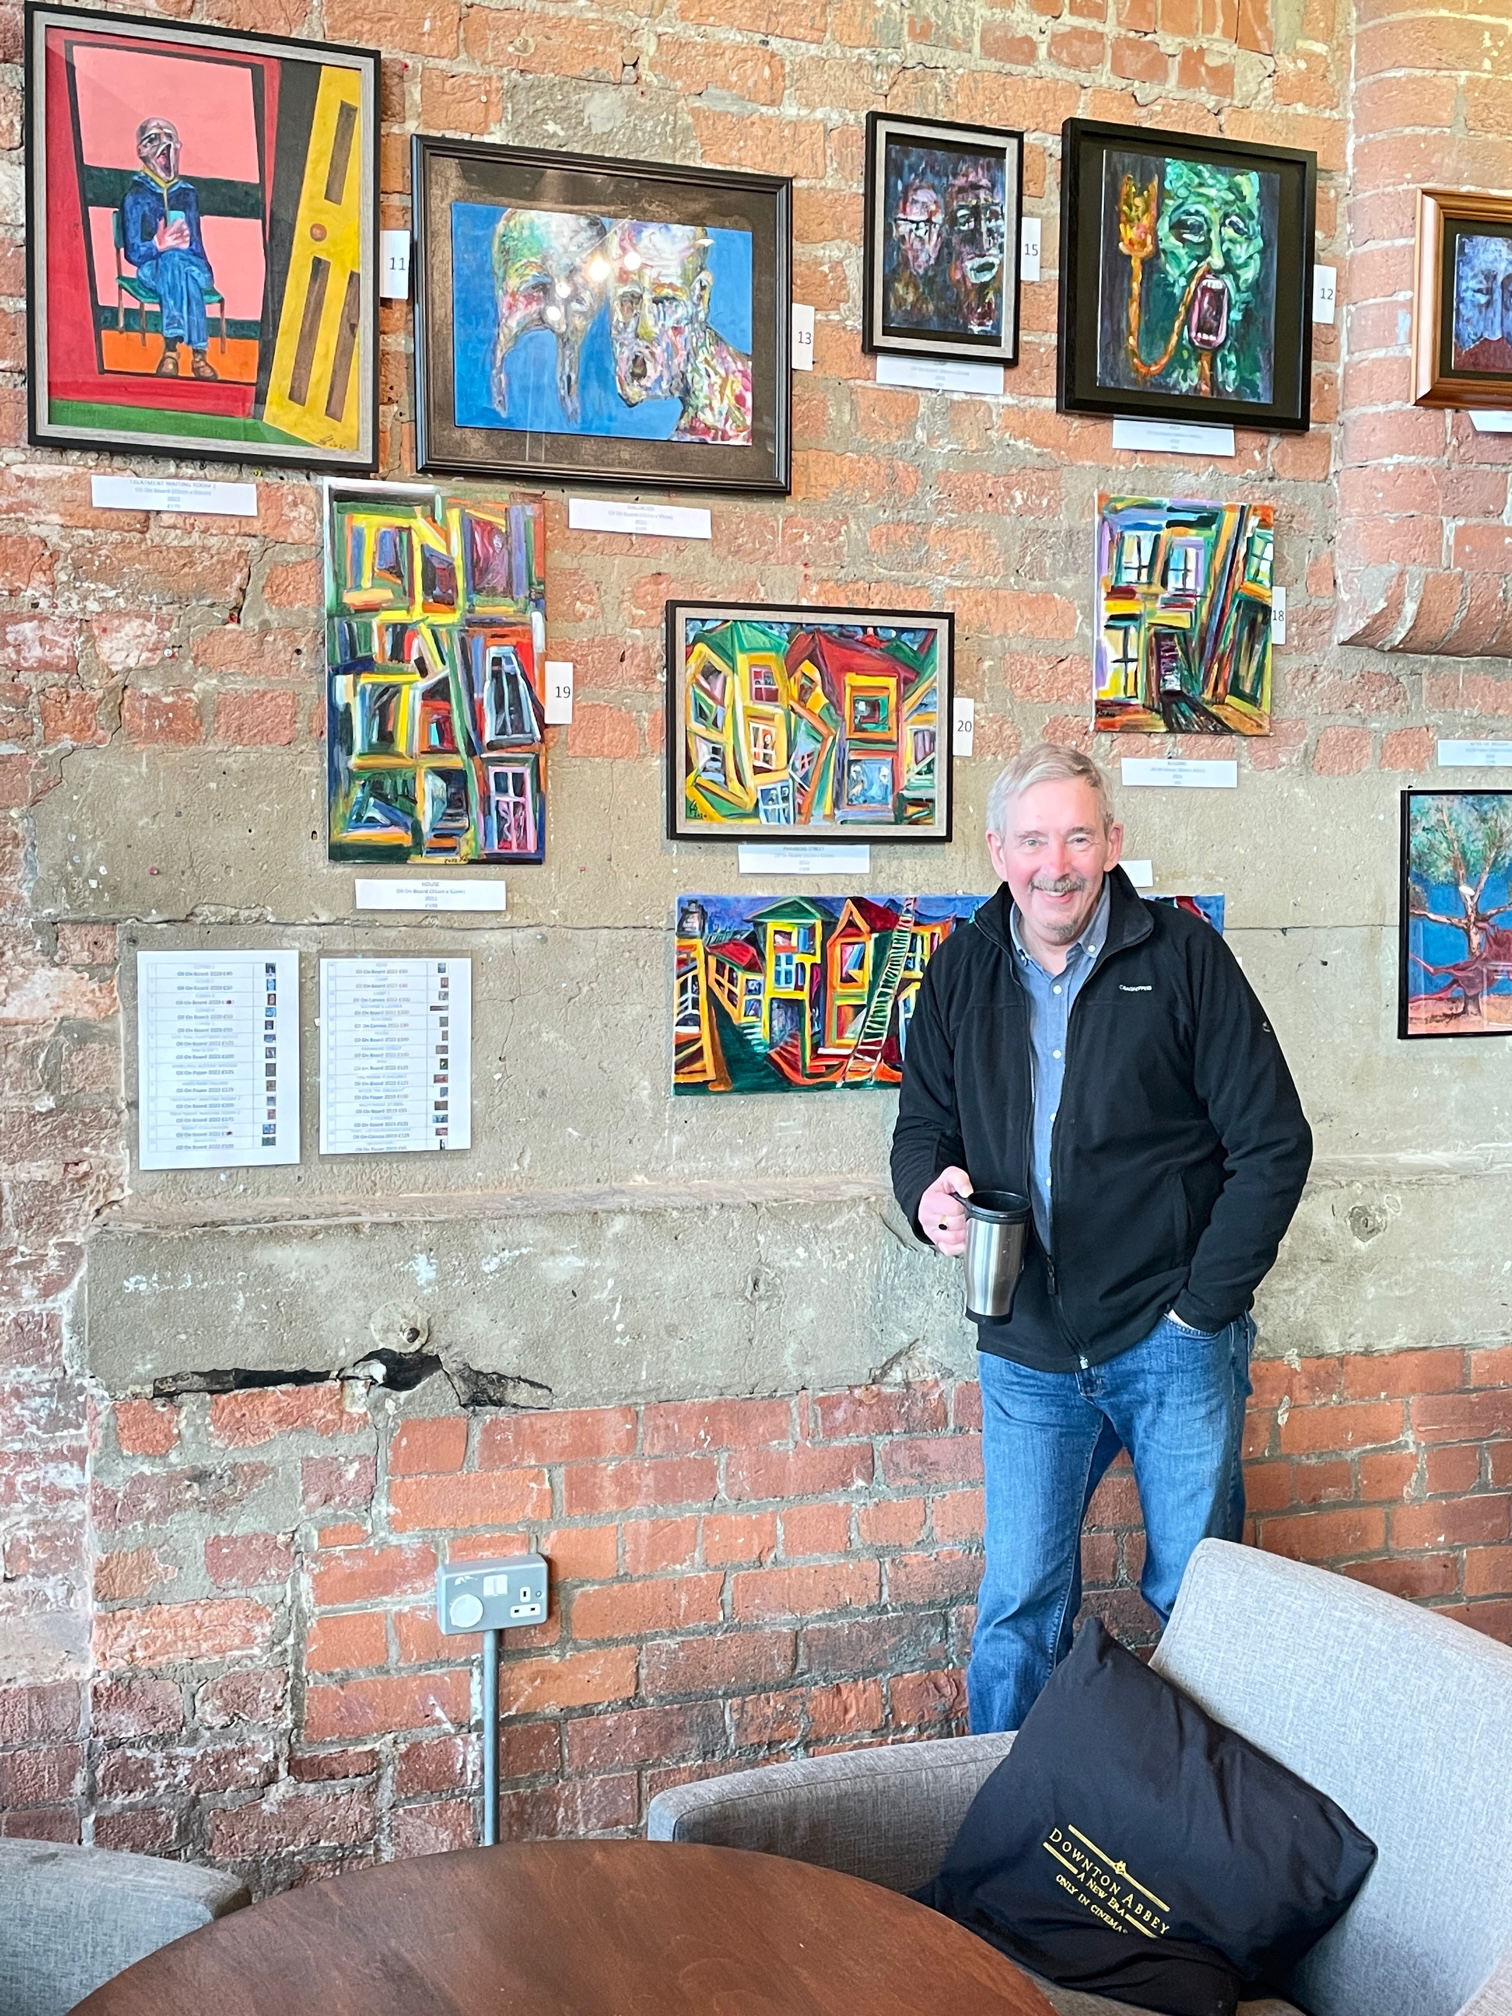 Ron Bould is delighted to be exhibiting his paintings at the City Screen Picturehouse in York. 